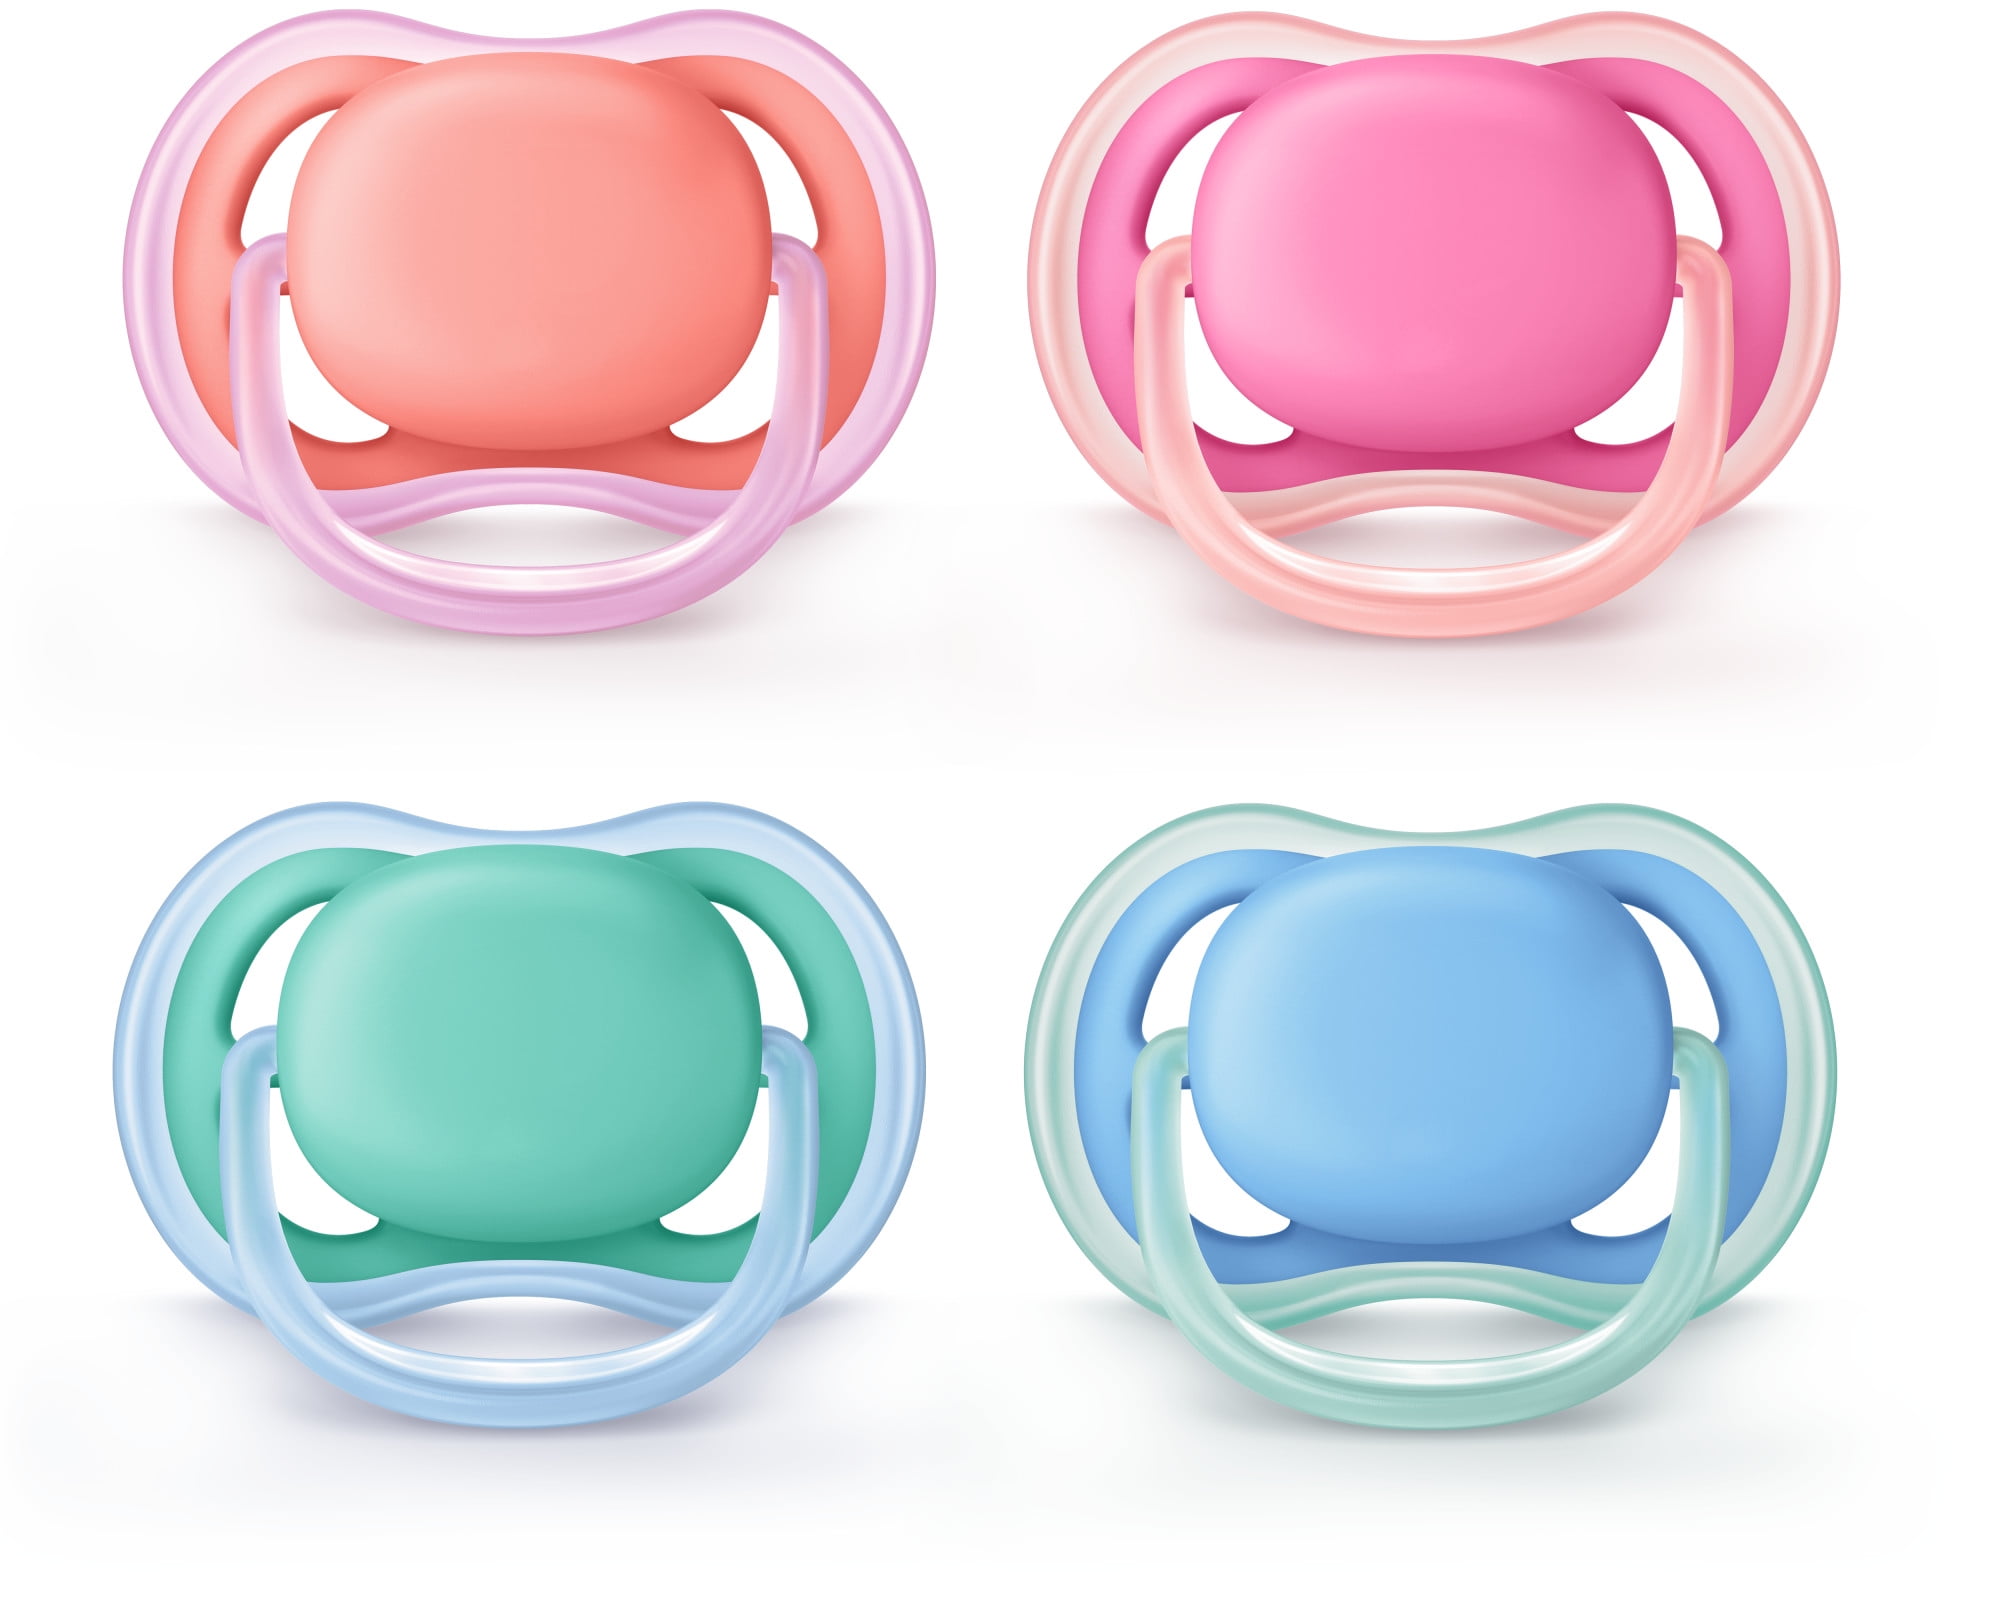 Philips Avent Classic Dummy Soothers Theme│Baby Pacifier│6-18m│2Pk│Pink 